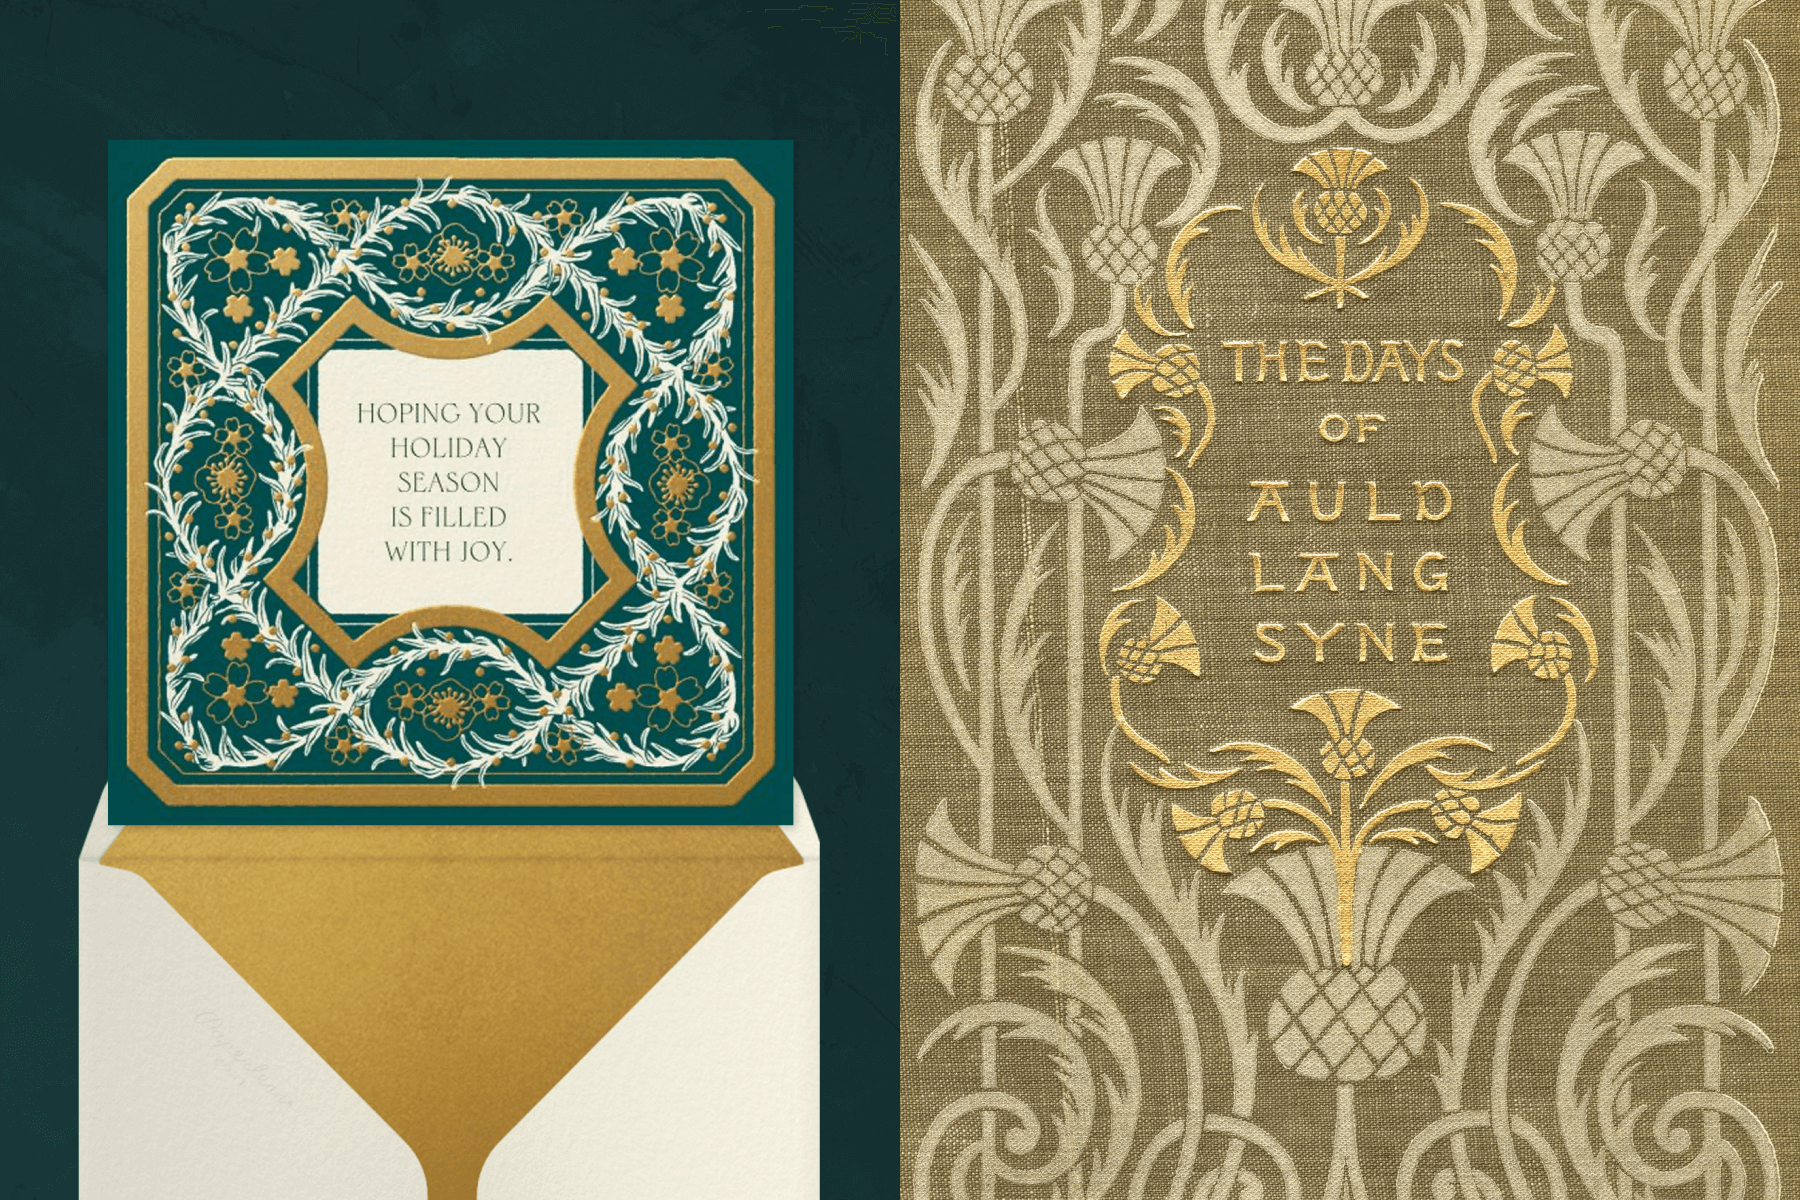 left: A green holiday card with gold borders and illustrated floral details and a pattern of interlocked white fir branches. Right: A gold-leafed book cover with interlocked thistle patterns.